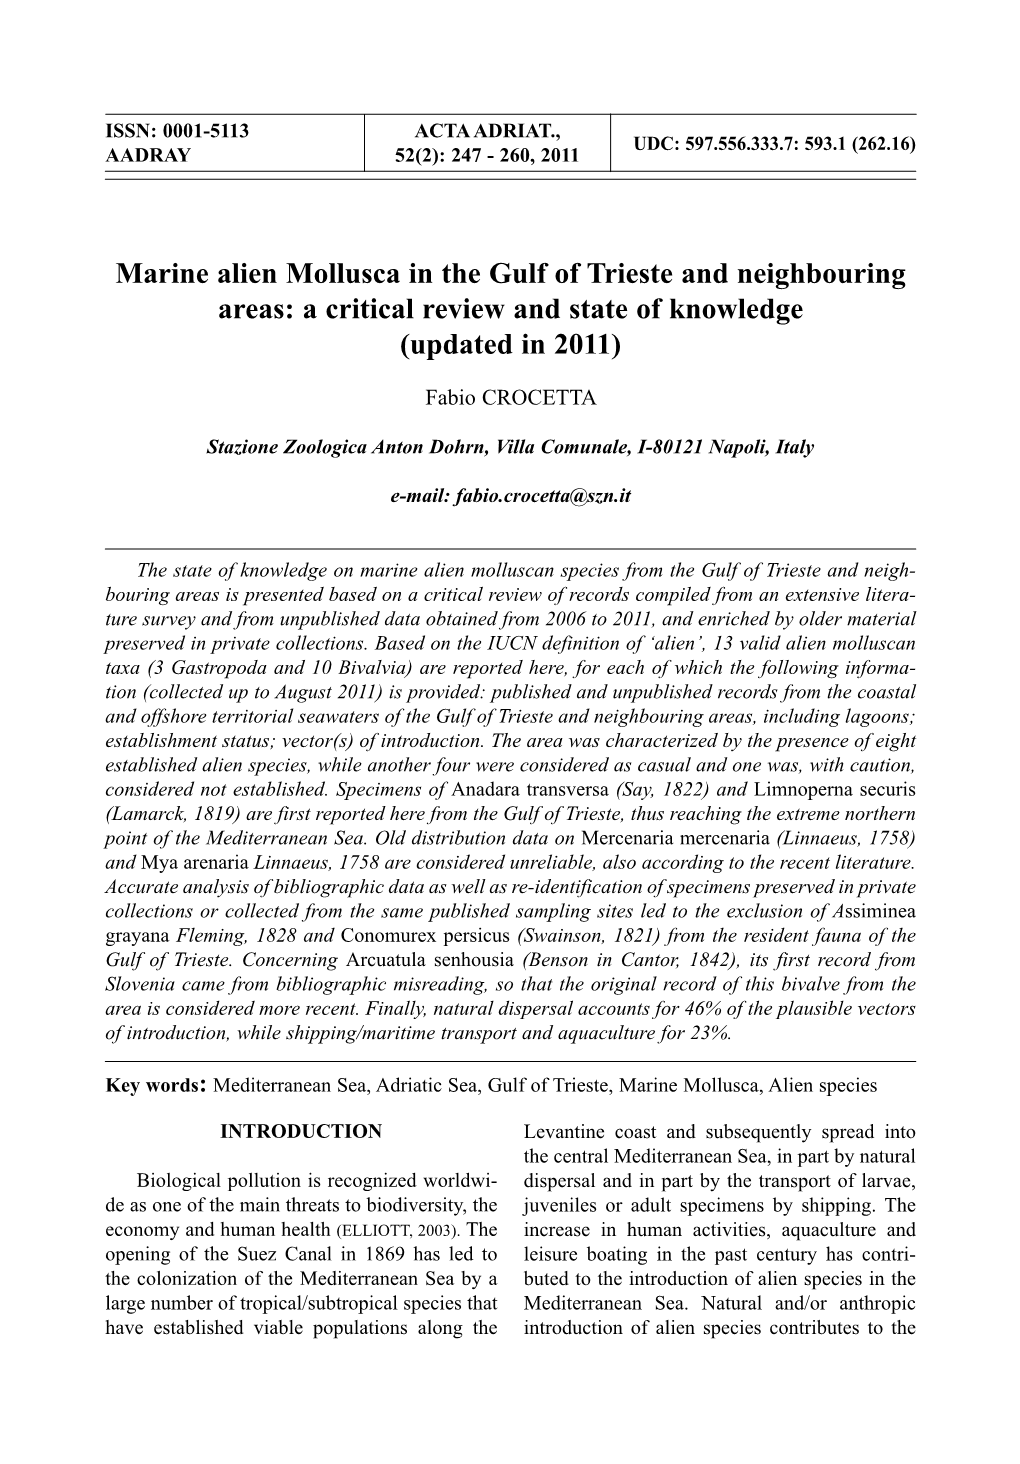 Marine Alien Mollusca in the Gulf of Trieste and Neighbouring Areas: a Critical Review and State of Knowledge (Updated in 2011)